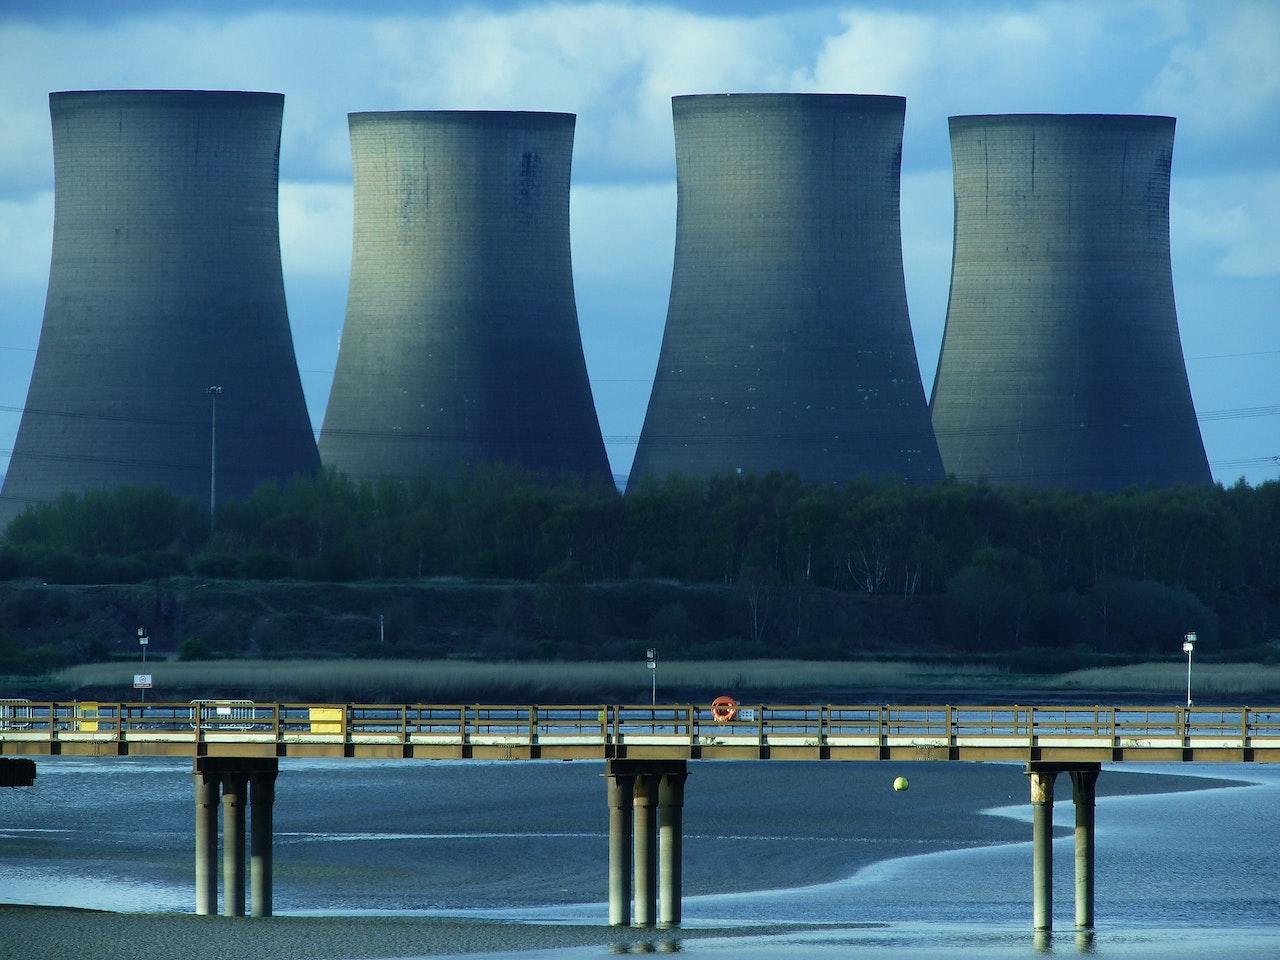 landscape photography of nuclear power plant